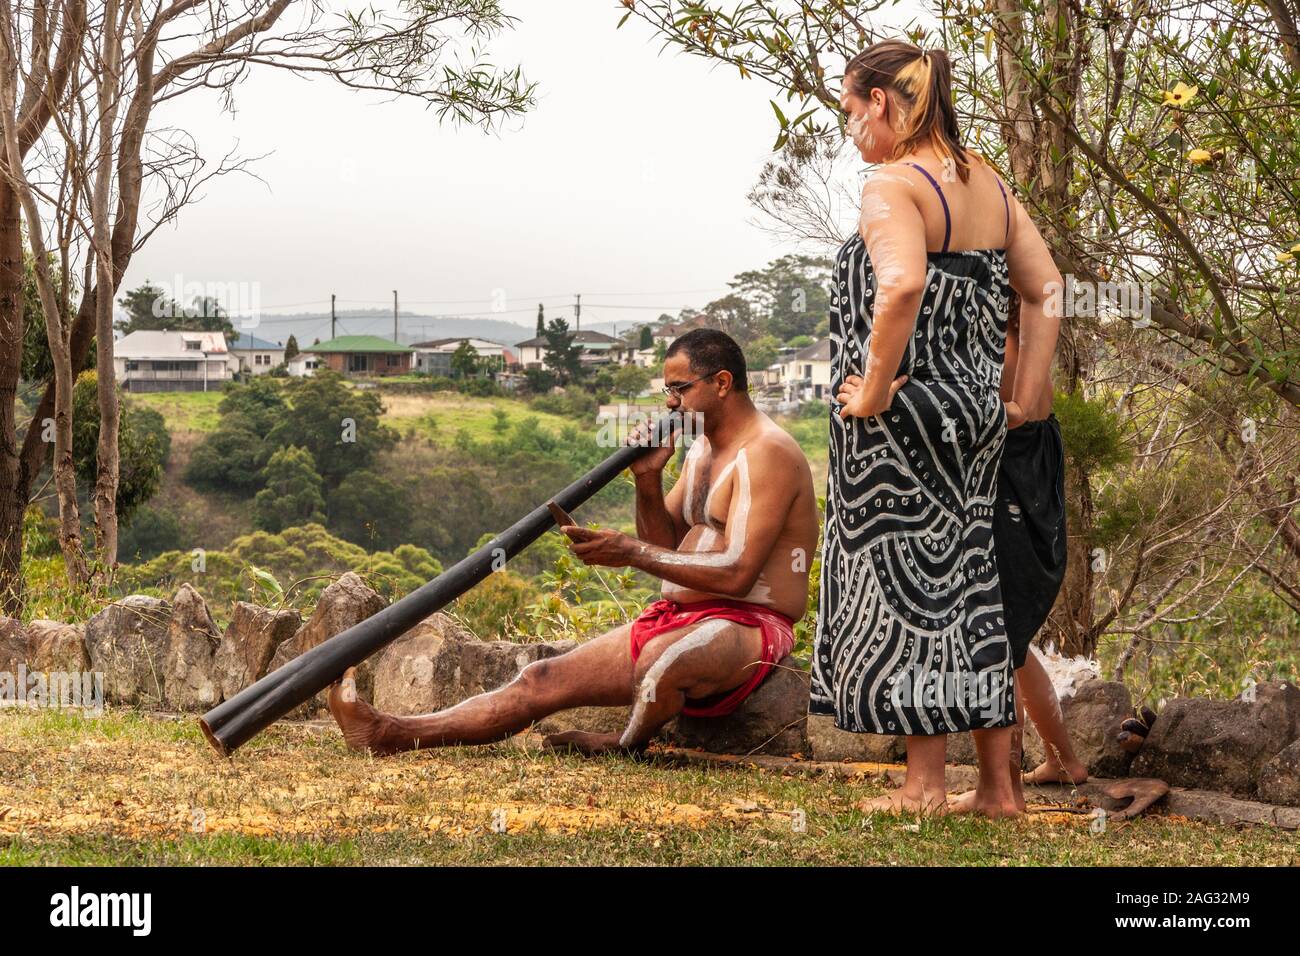 Newcastle, Australia - December 10, 2009: Aboriginal Woman looks at man who sits on tree stump blowing black didgeridoo in front of green foliage. Whi Stock Photo